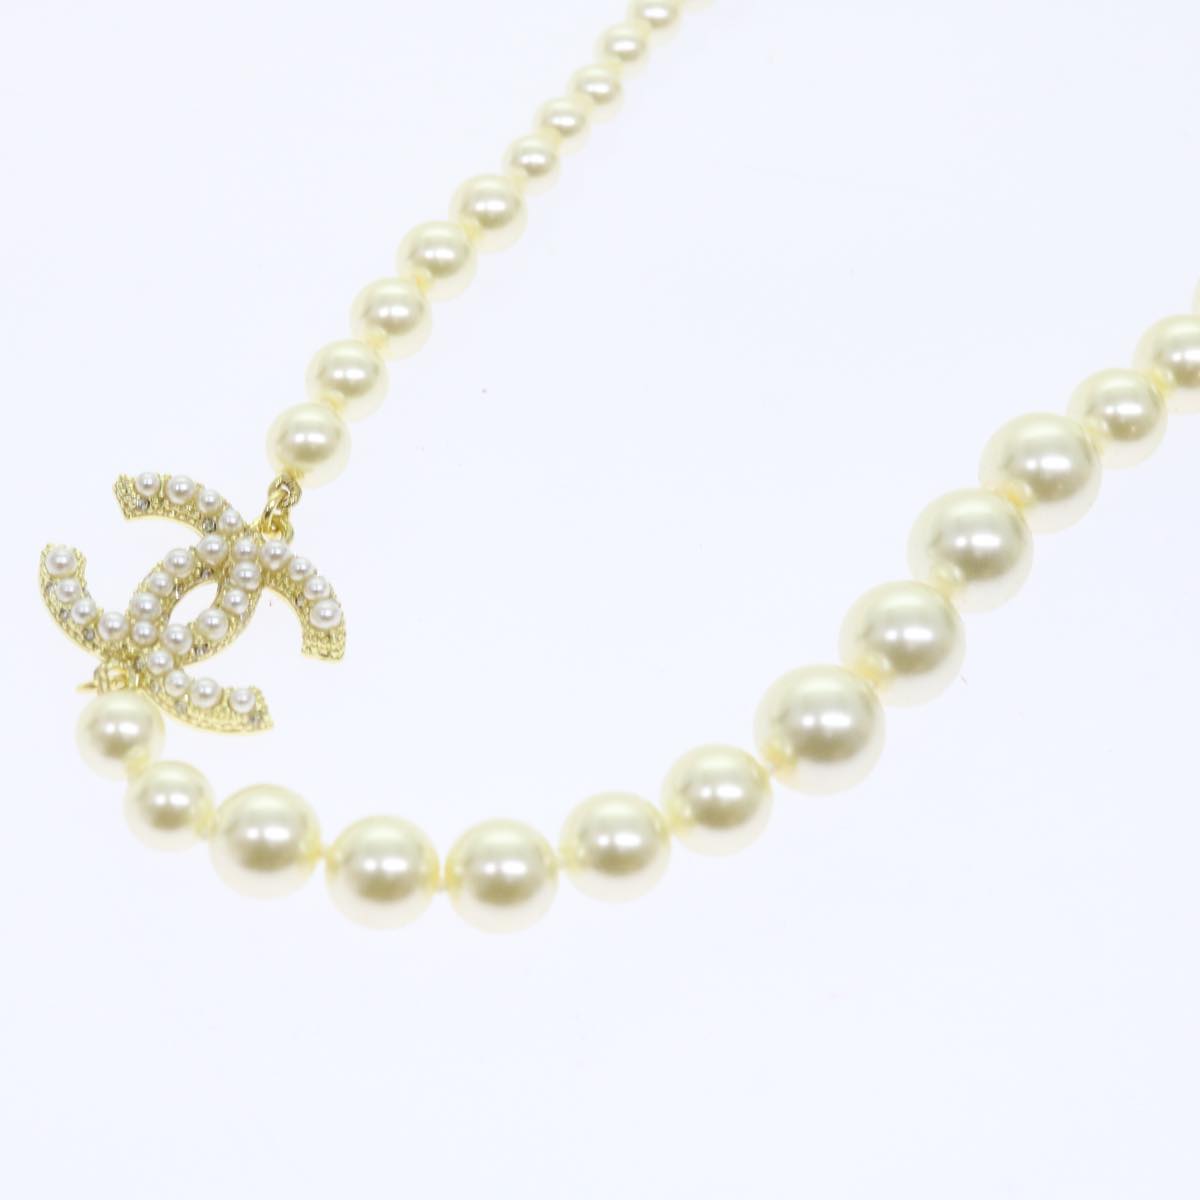 CHANEL Pearl Necklace Metal White Gold Tone CC Auth 56729A - 0